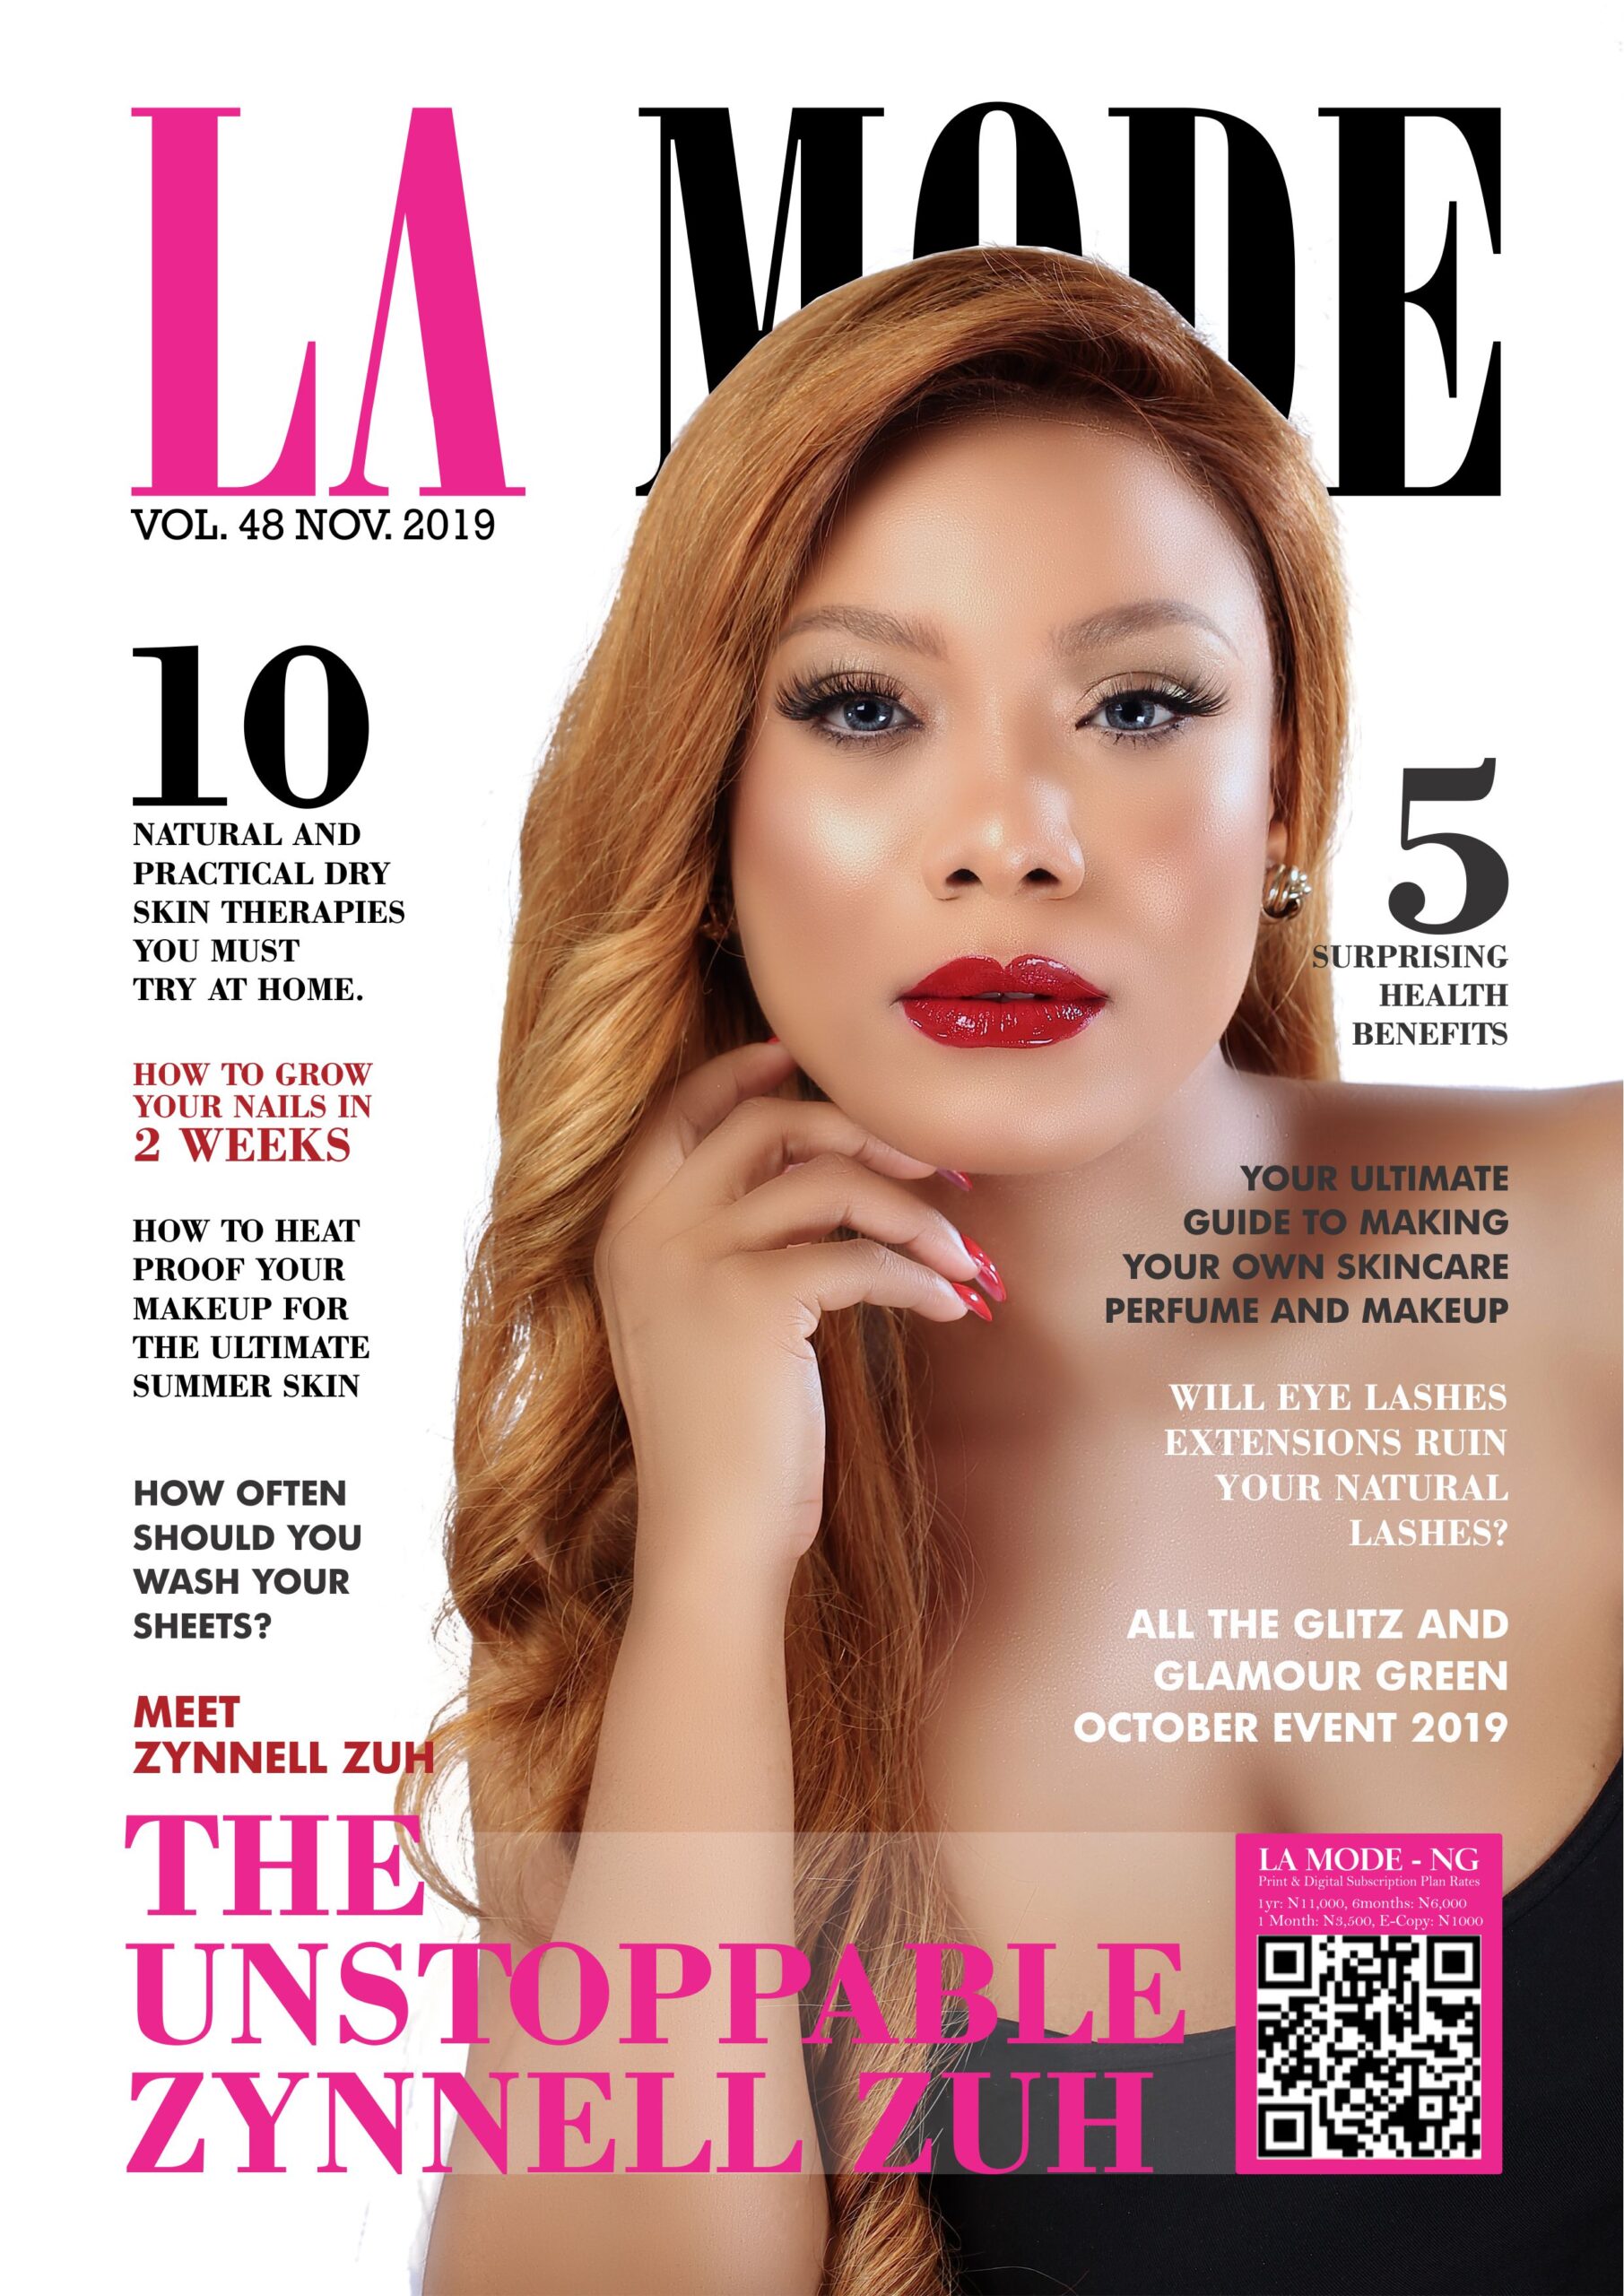 The 48th edition of La Mode Magazine featuring Zynnell Zuh.